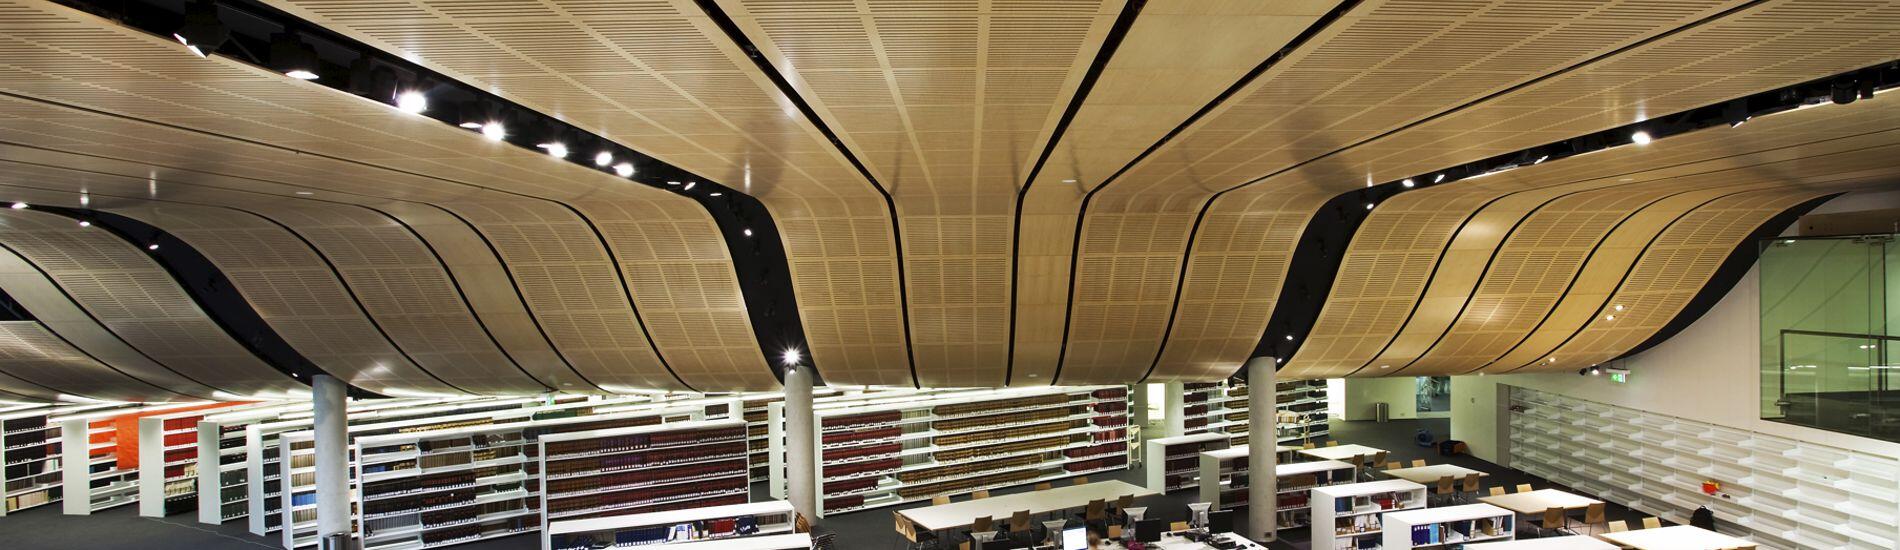 Sweeping curved SUPACOUSTIC slotted acoutic panels solve noice echo in large library space